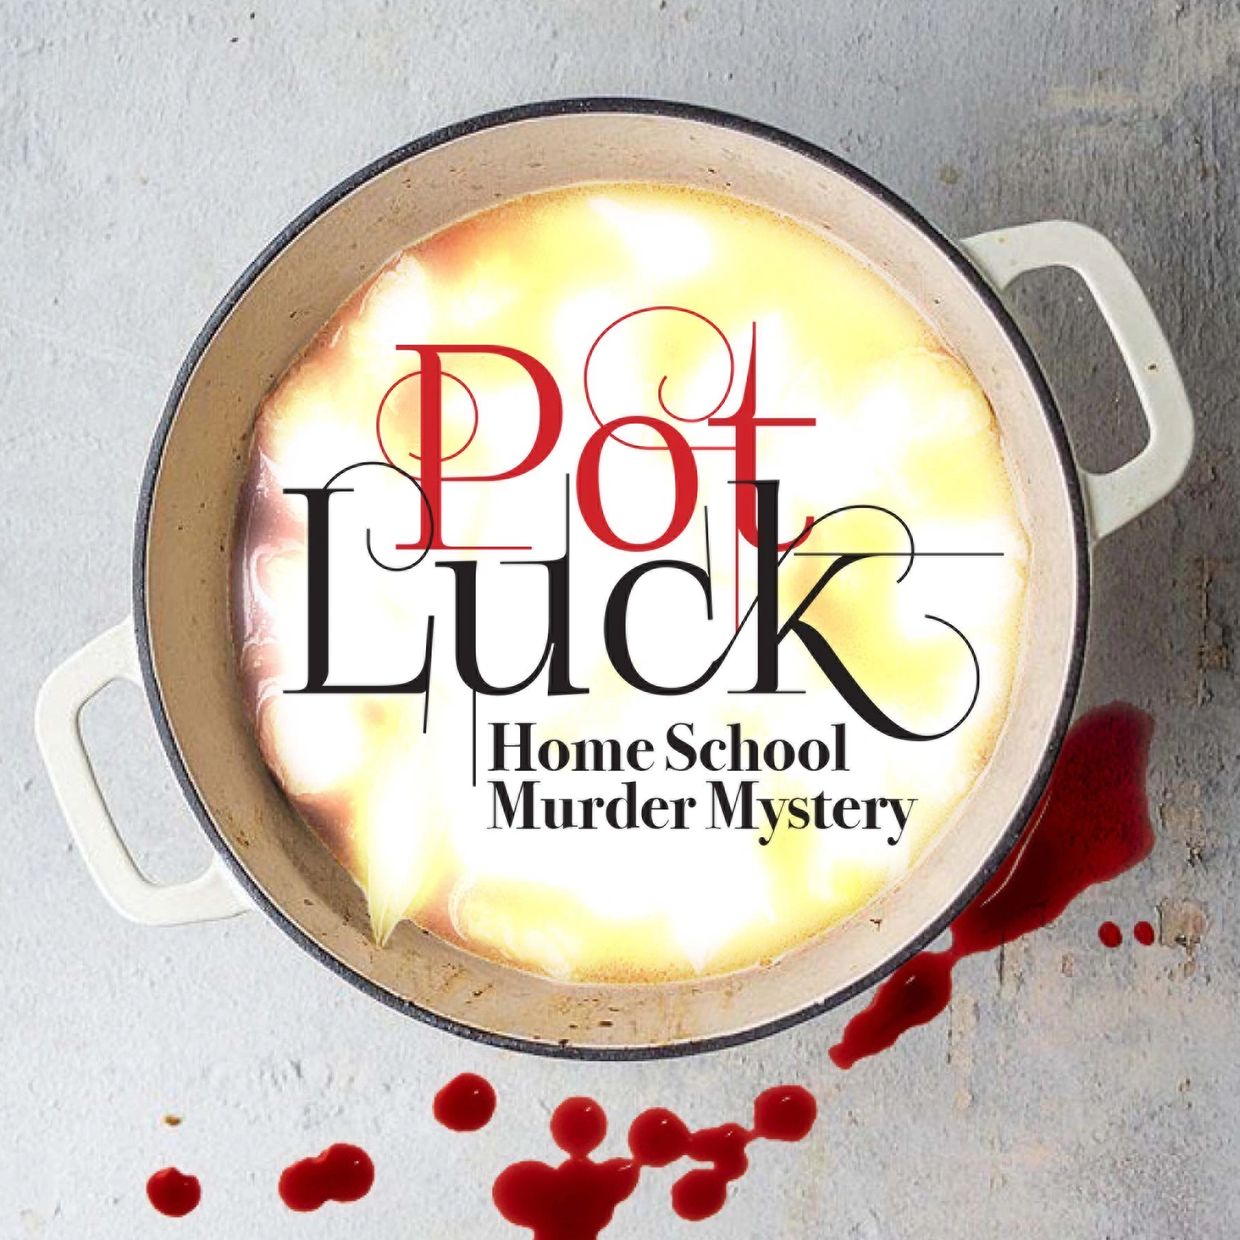 Pot Luck book. White stew pot with book title in center, blood droplets around side of pot on gray.